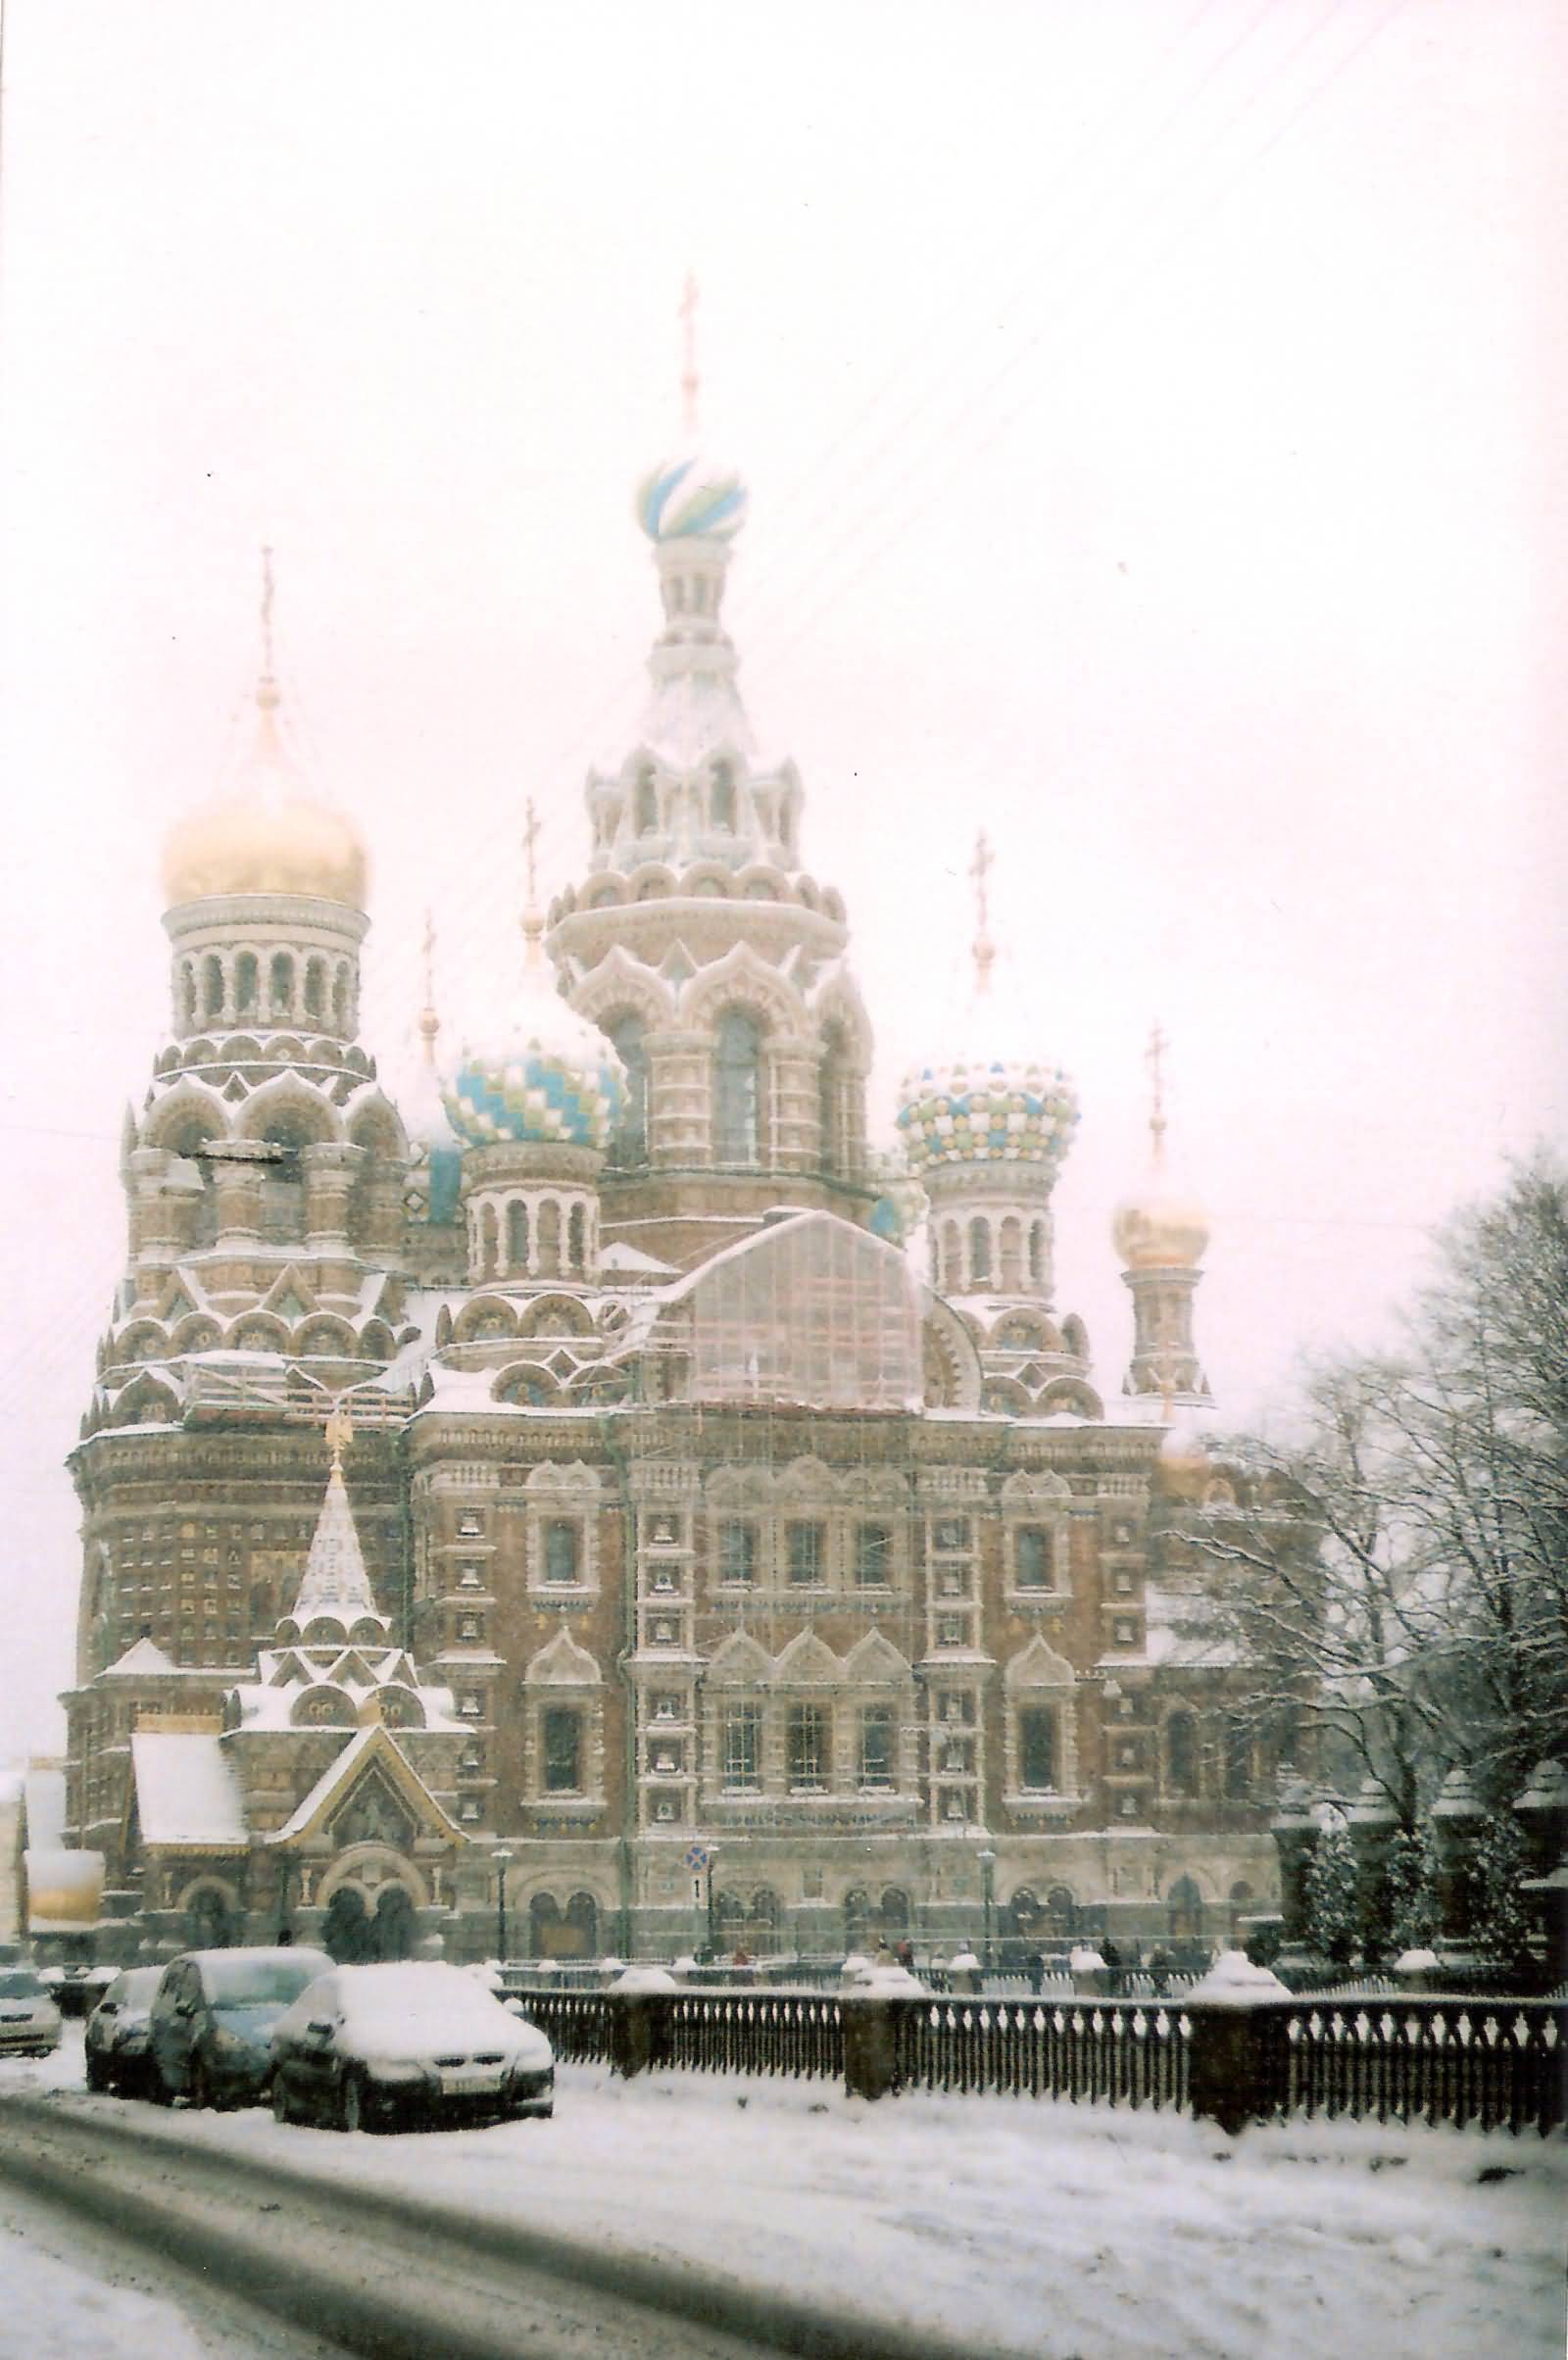 The Church Of The Savior On Blood In Winter